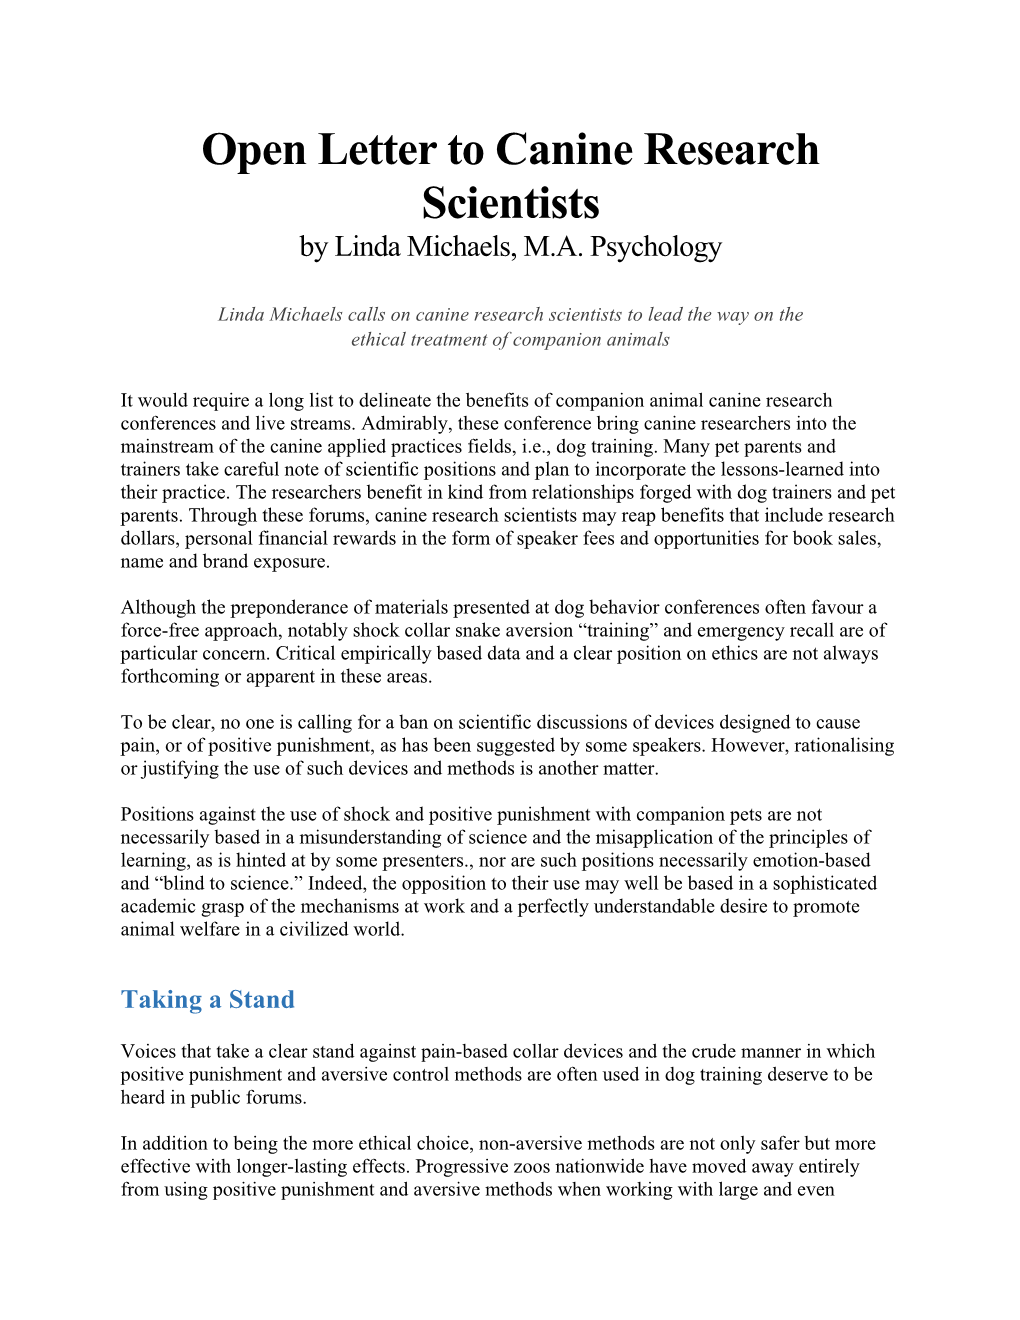 Open Letter to Canine Research Scientists by Linda Michaels, M.A